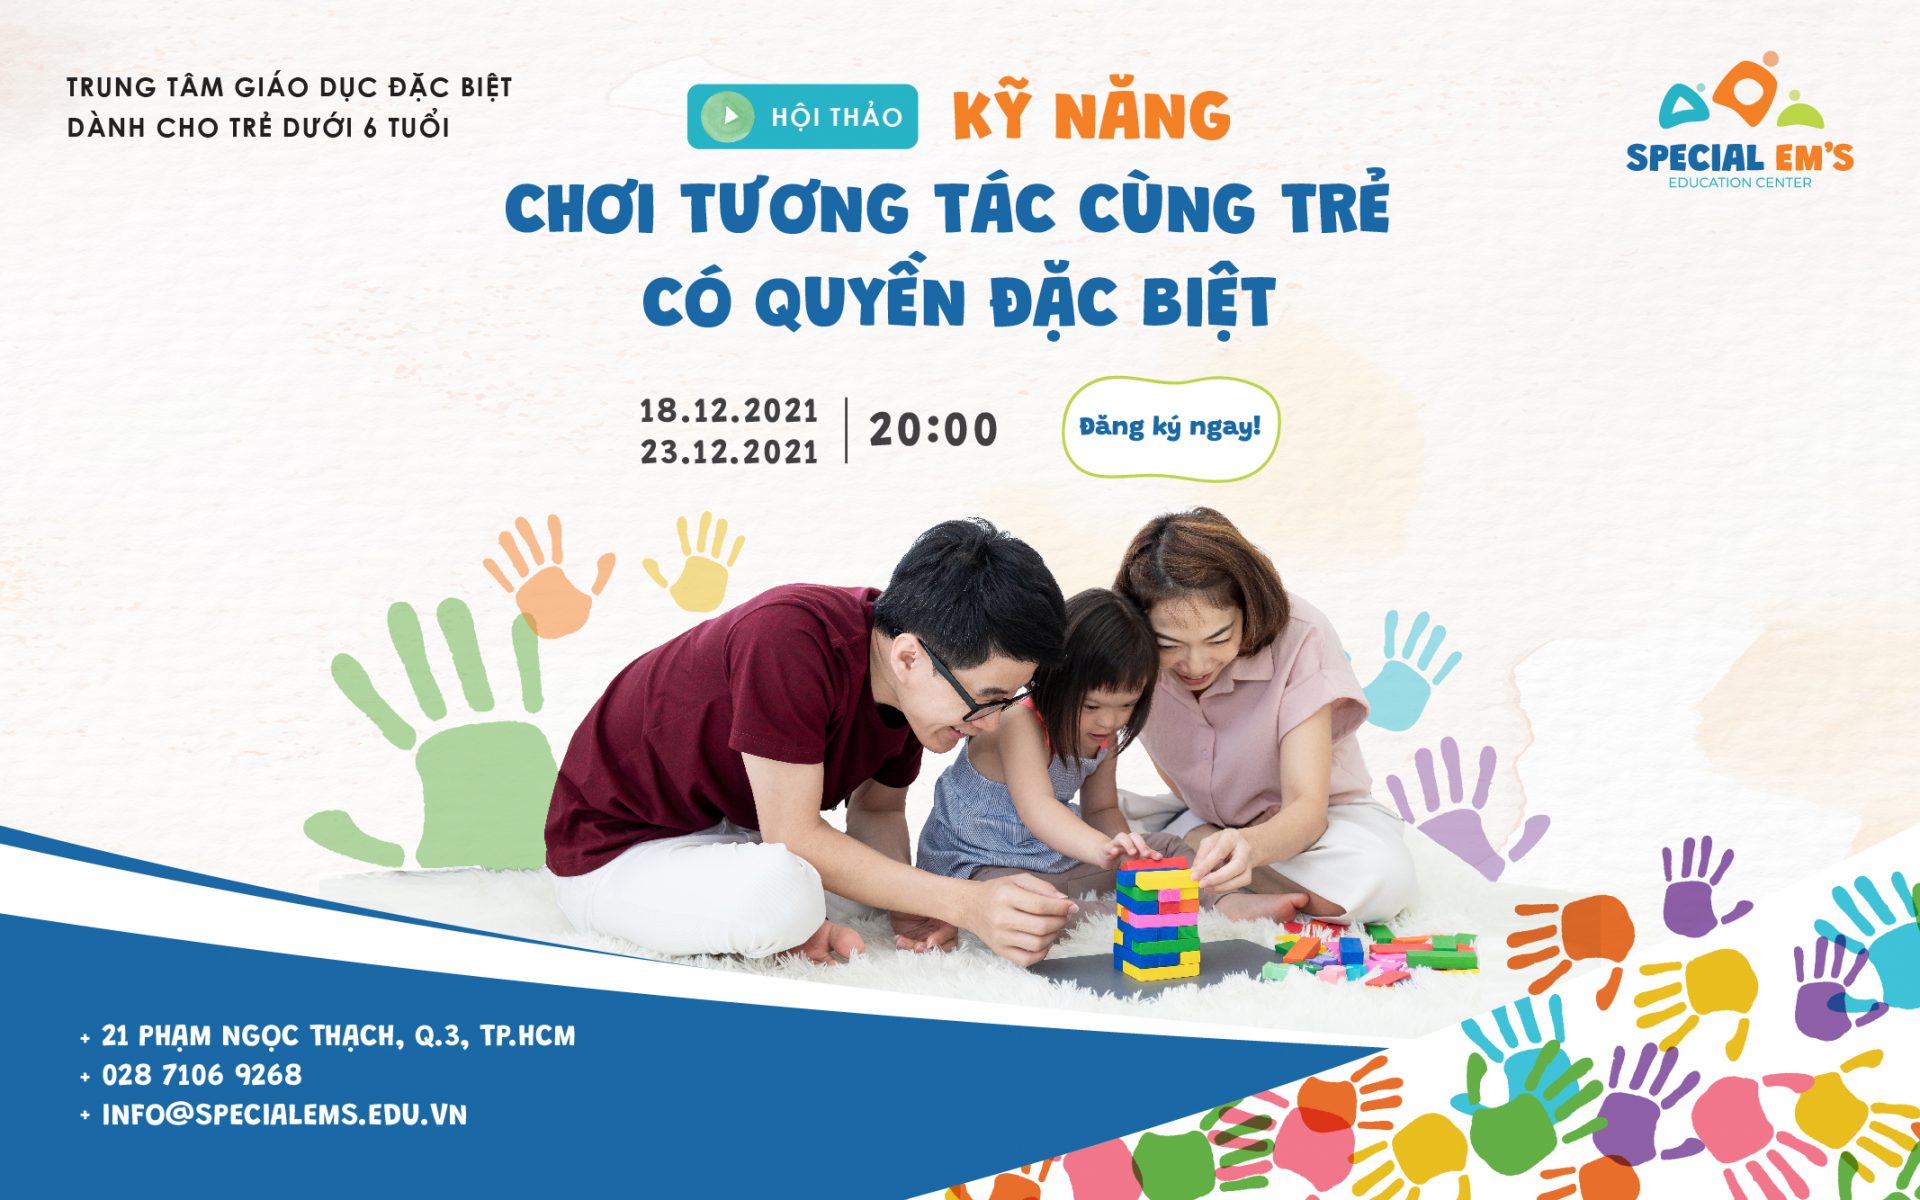 Online Special Education Workshop: “Parents Learn The Skills To Play With Special Rights Children”